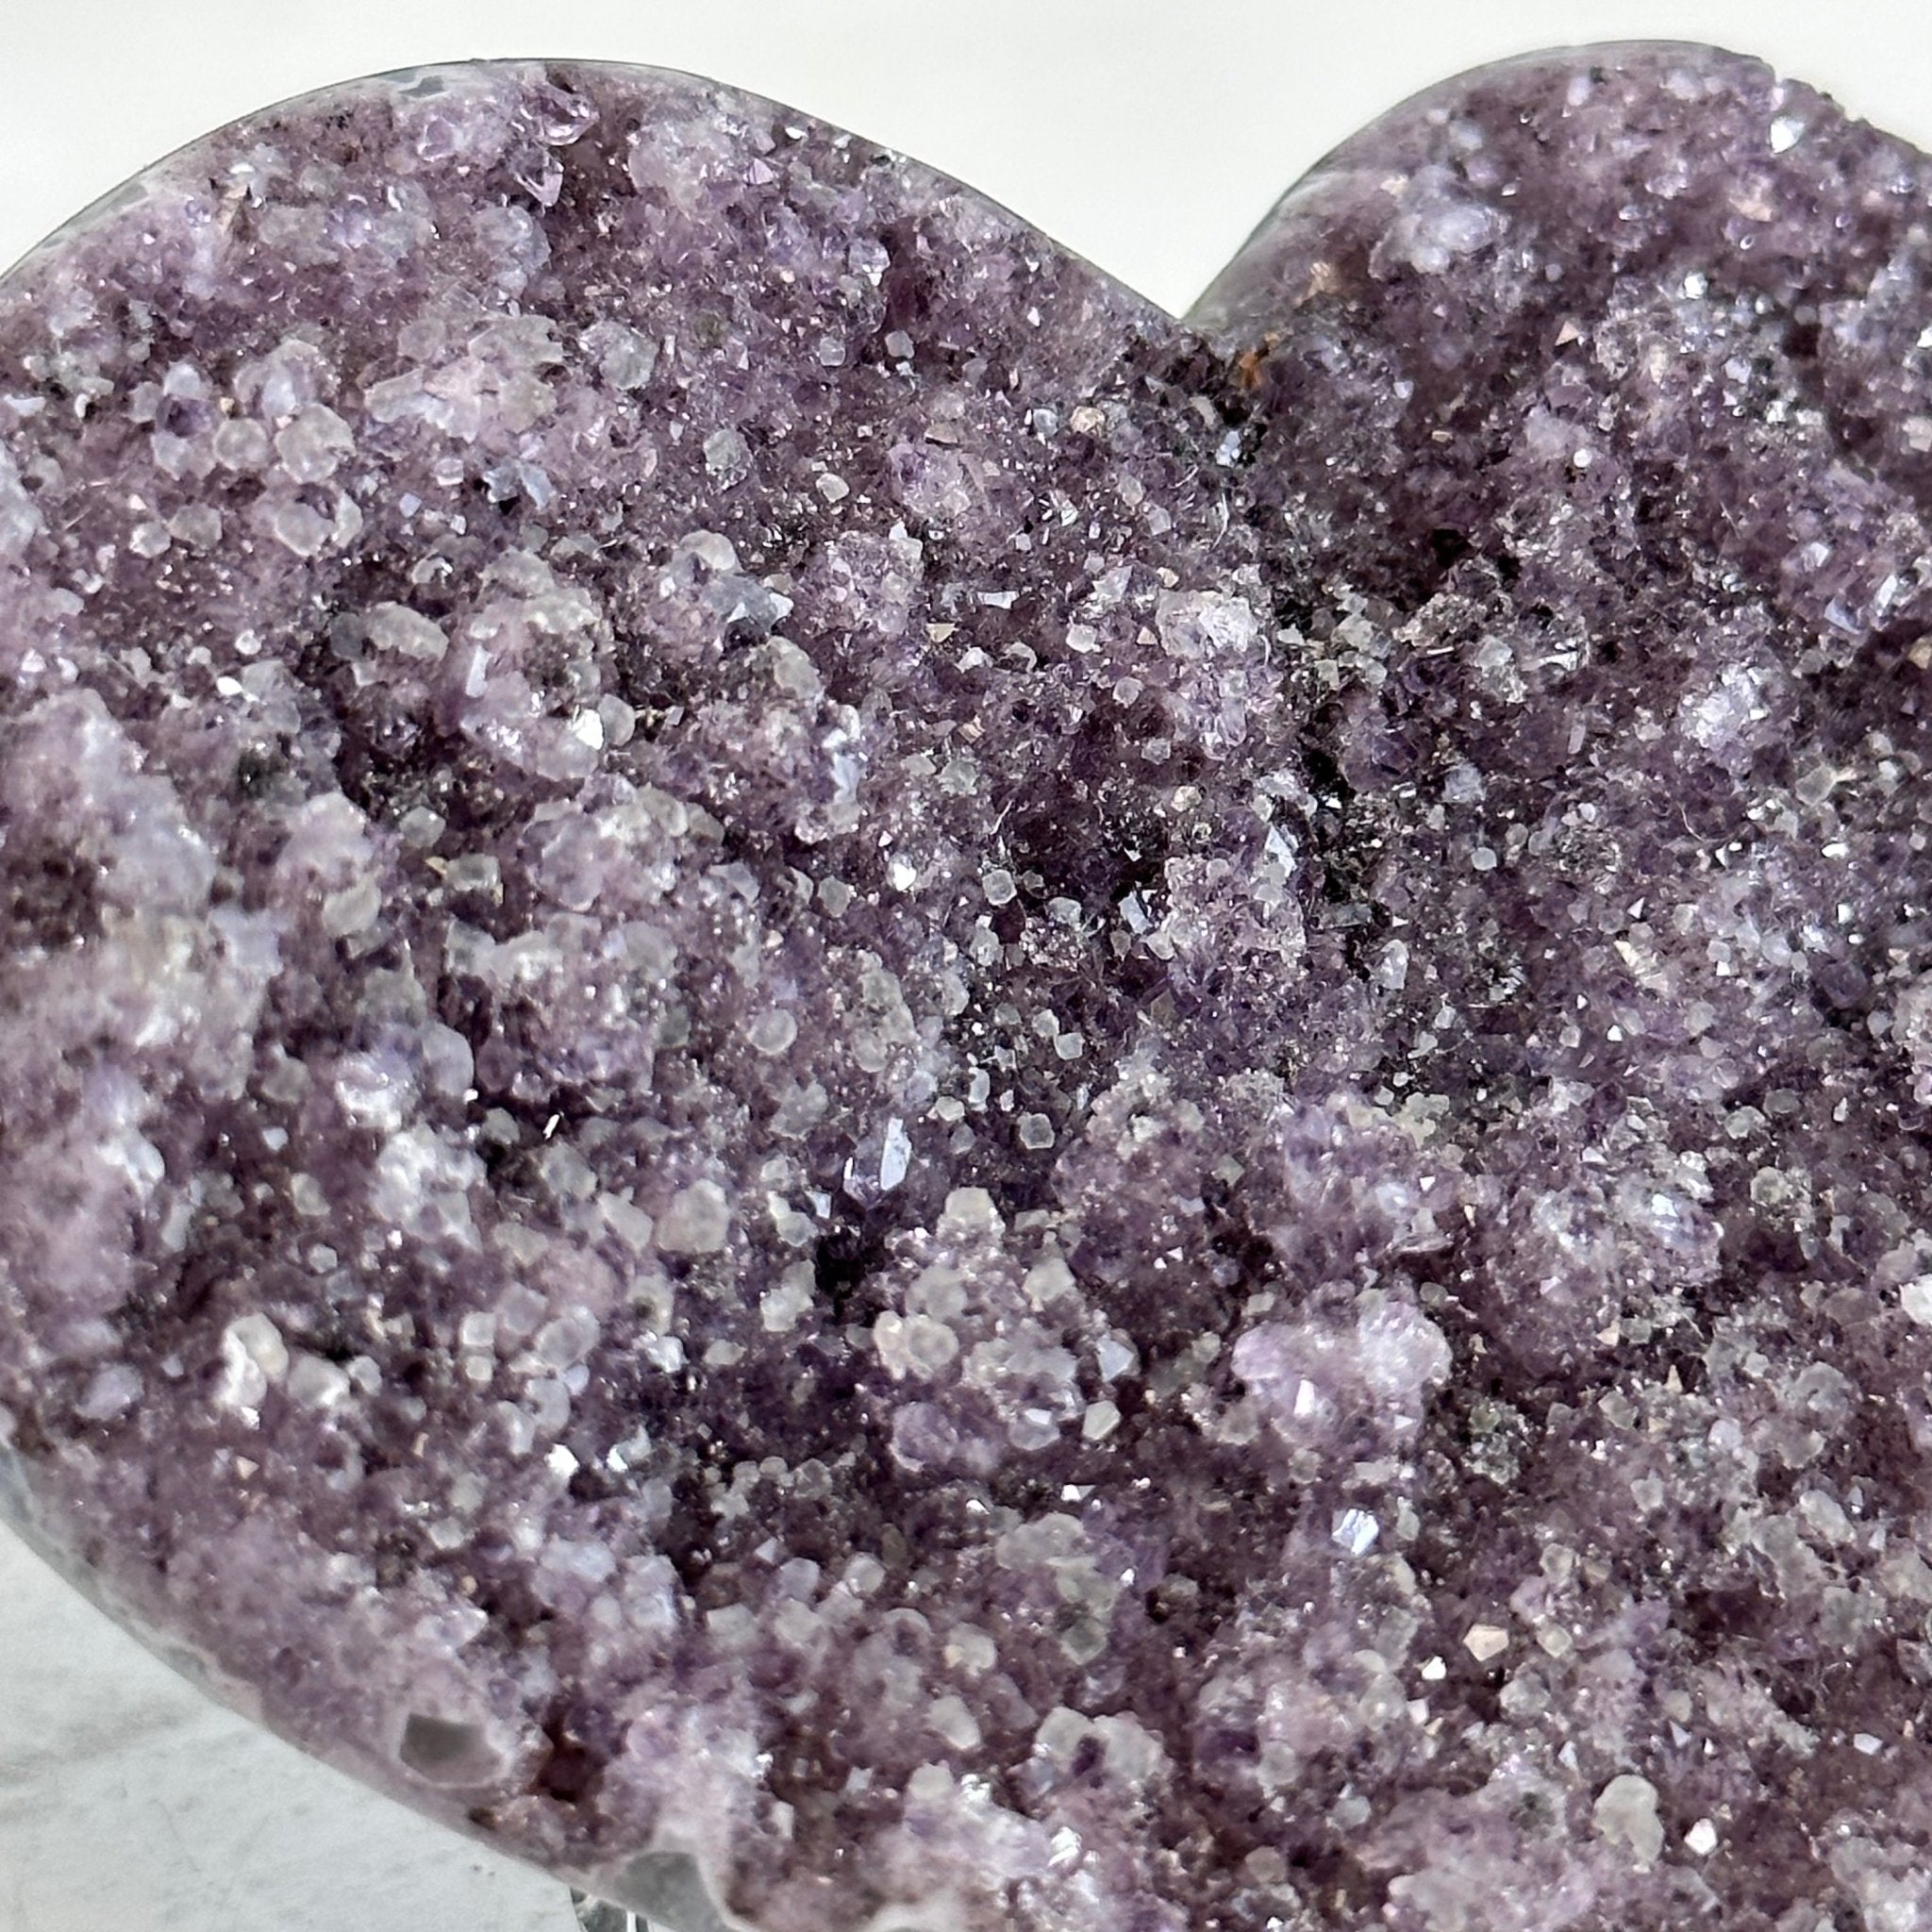 Extra Quality Amethyst Heart Geode on an Acrylic Stand, 0.31 lbs & 2.2" Tall #5462-0026 by Brazil Gems - Brazil GemsBrazil GemsExtra Quality Amethyst Heart Geode on an Acrylic Stand, 0.31 lbs & 2.2" Tall #5462-0026 by Brazil GemsHearts5462-0026